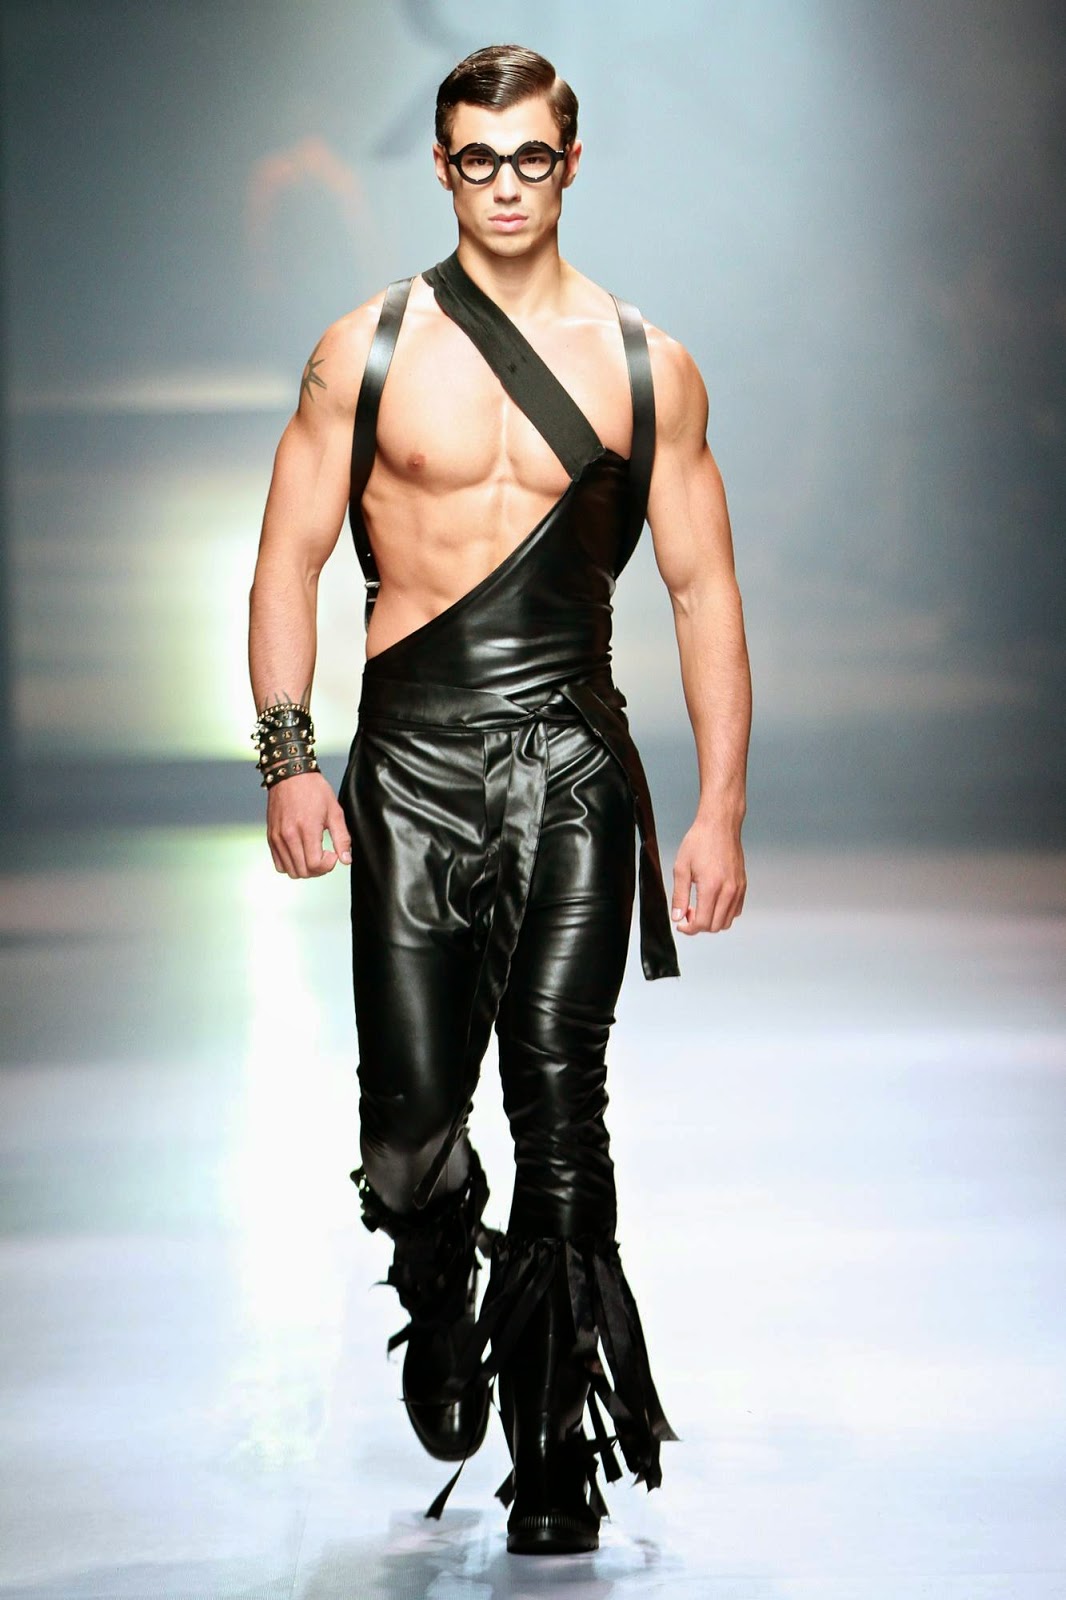 Male Models Fashion Week Wallpapers High Quality | Download Free